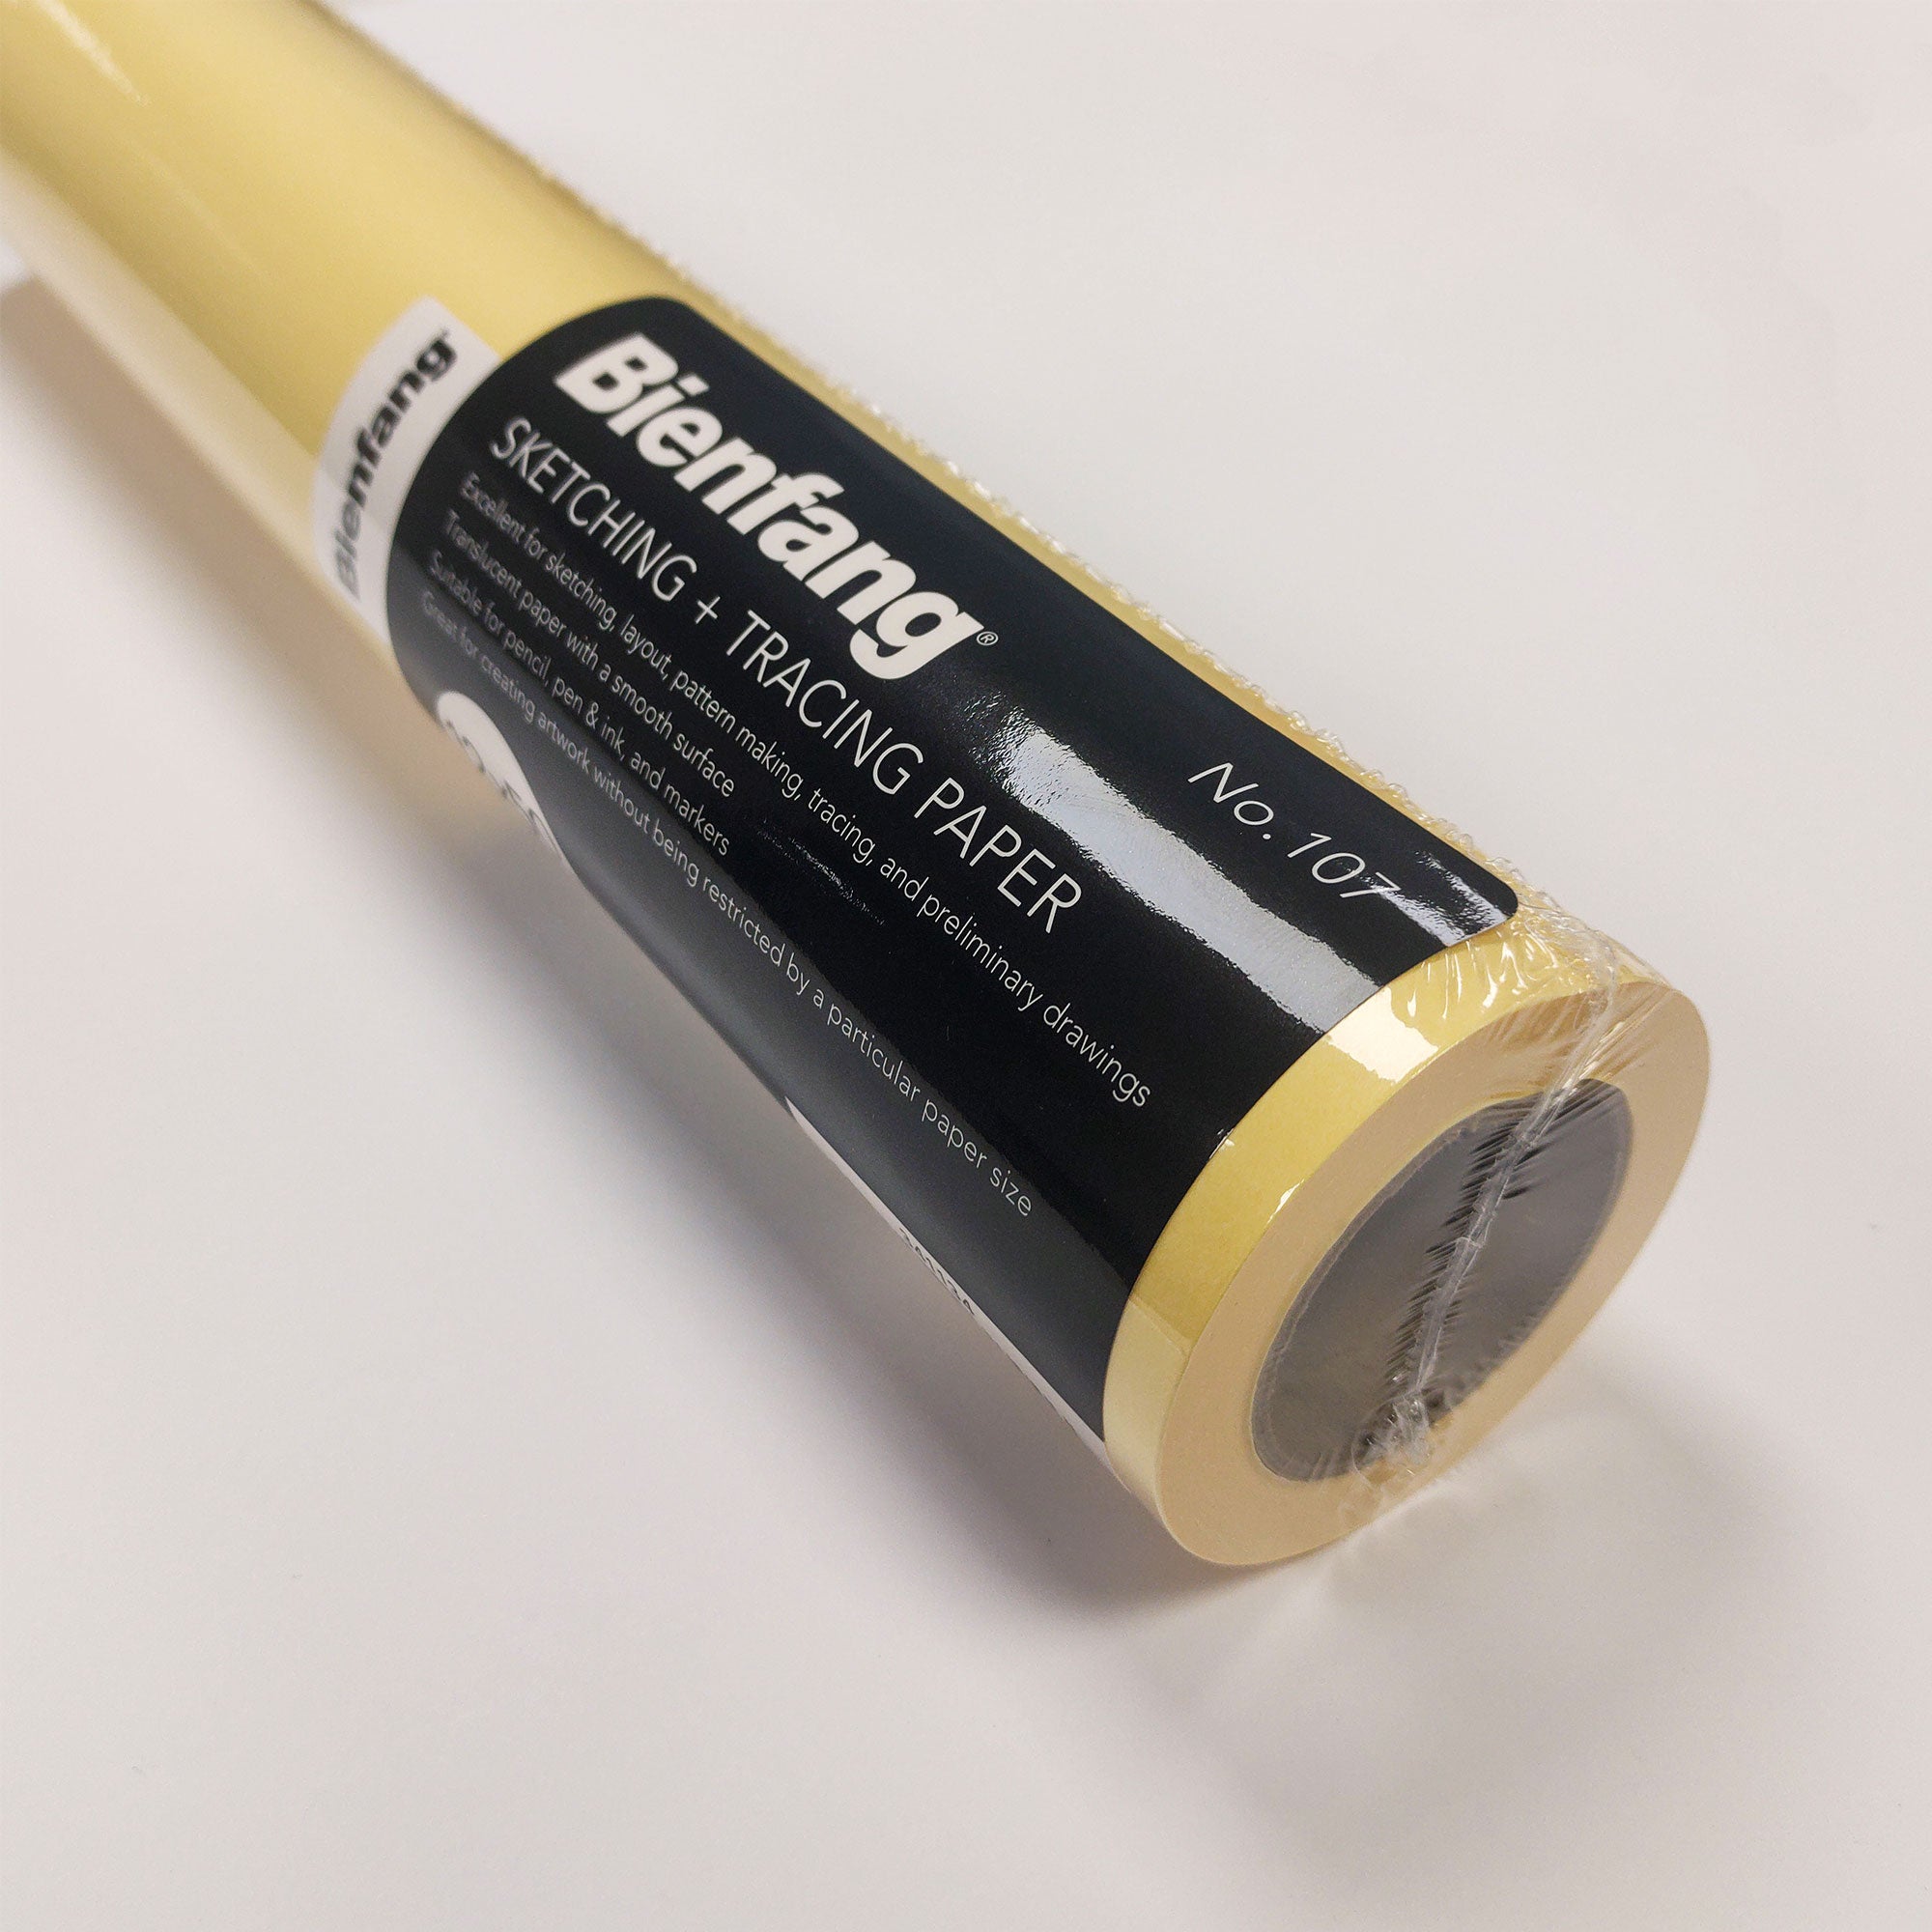 Bienfang Sketching & Tracing Paper Roll, Canary Yellow, 20 Yards x 18 Inches